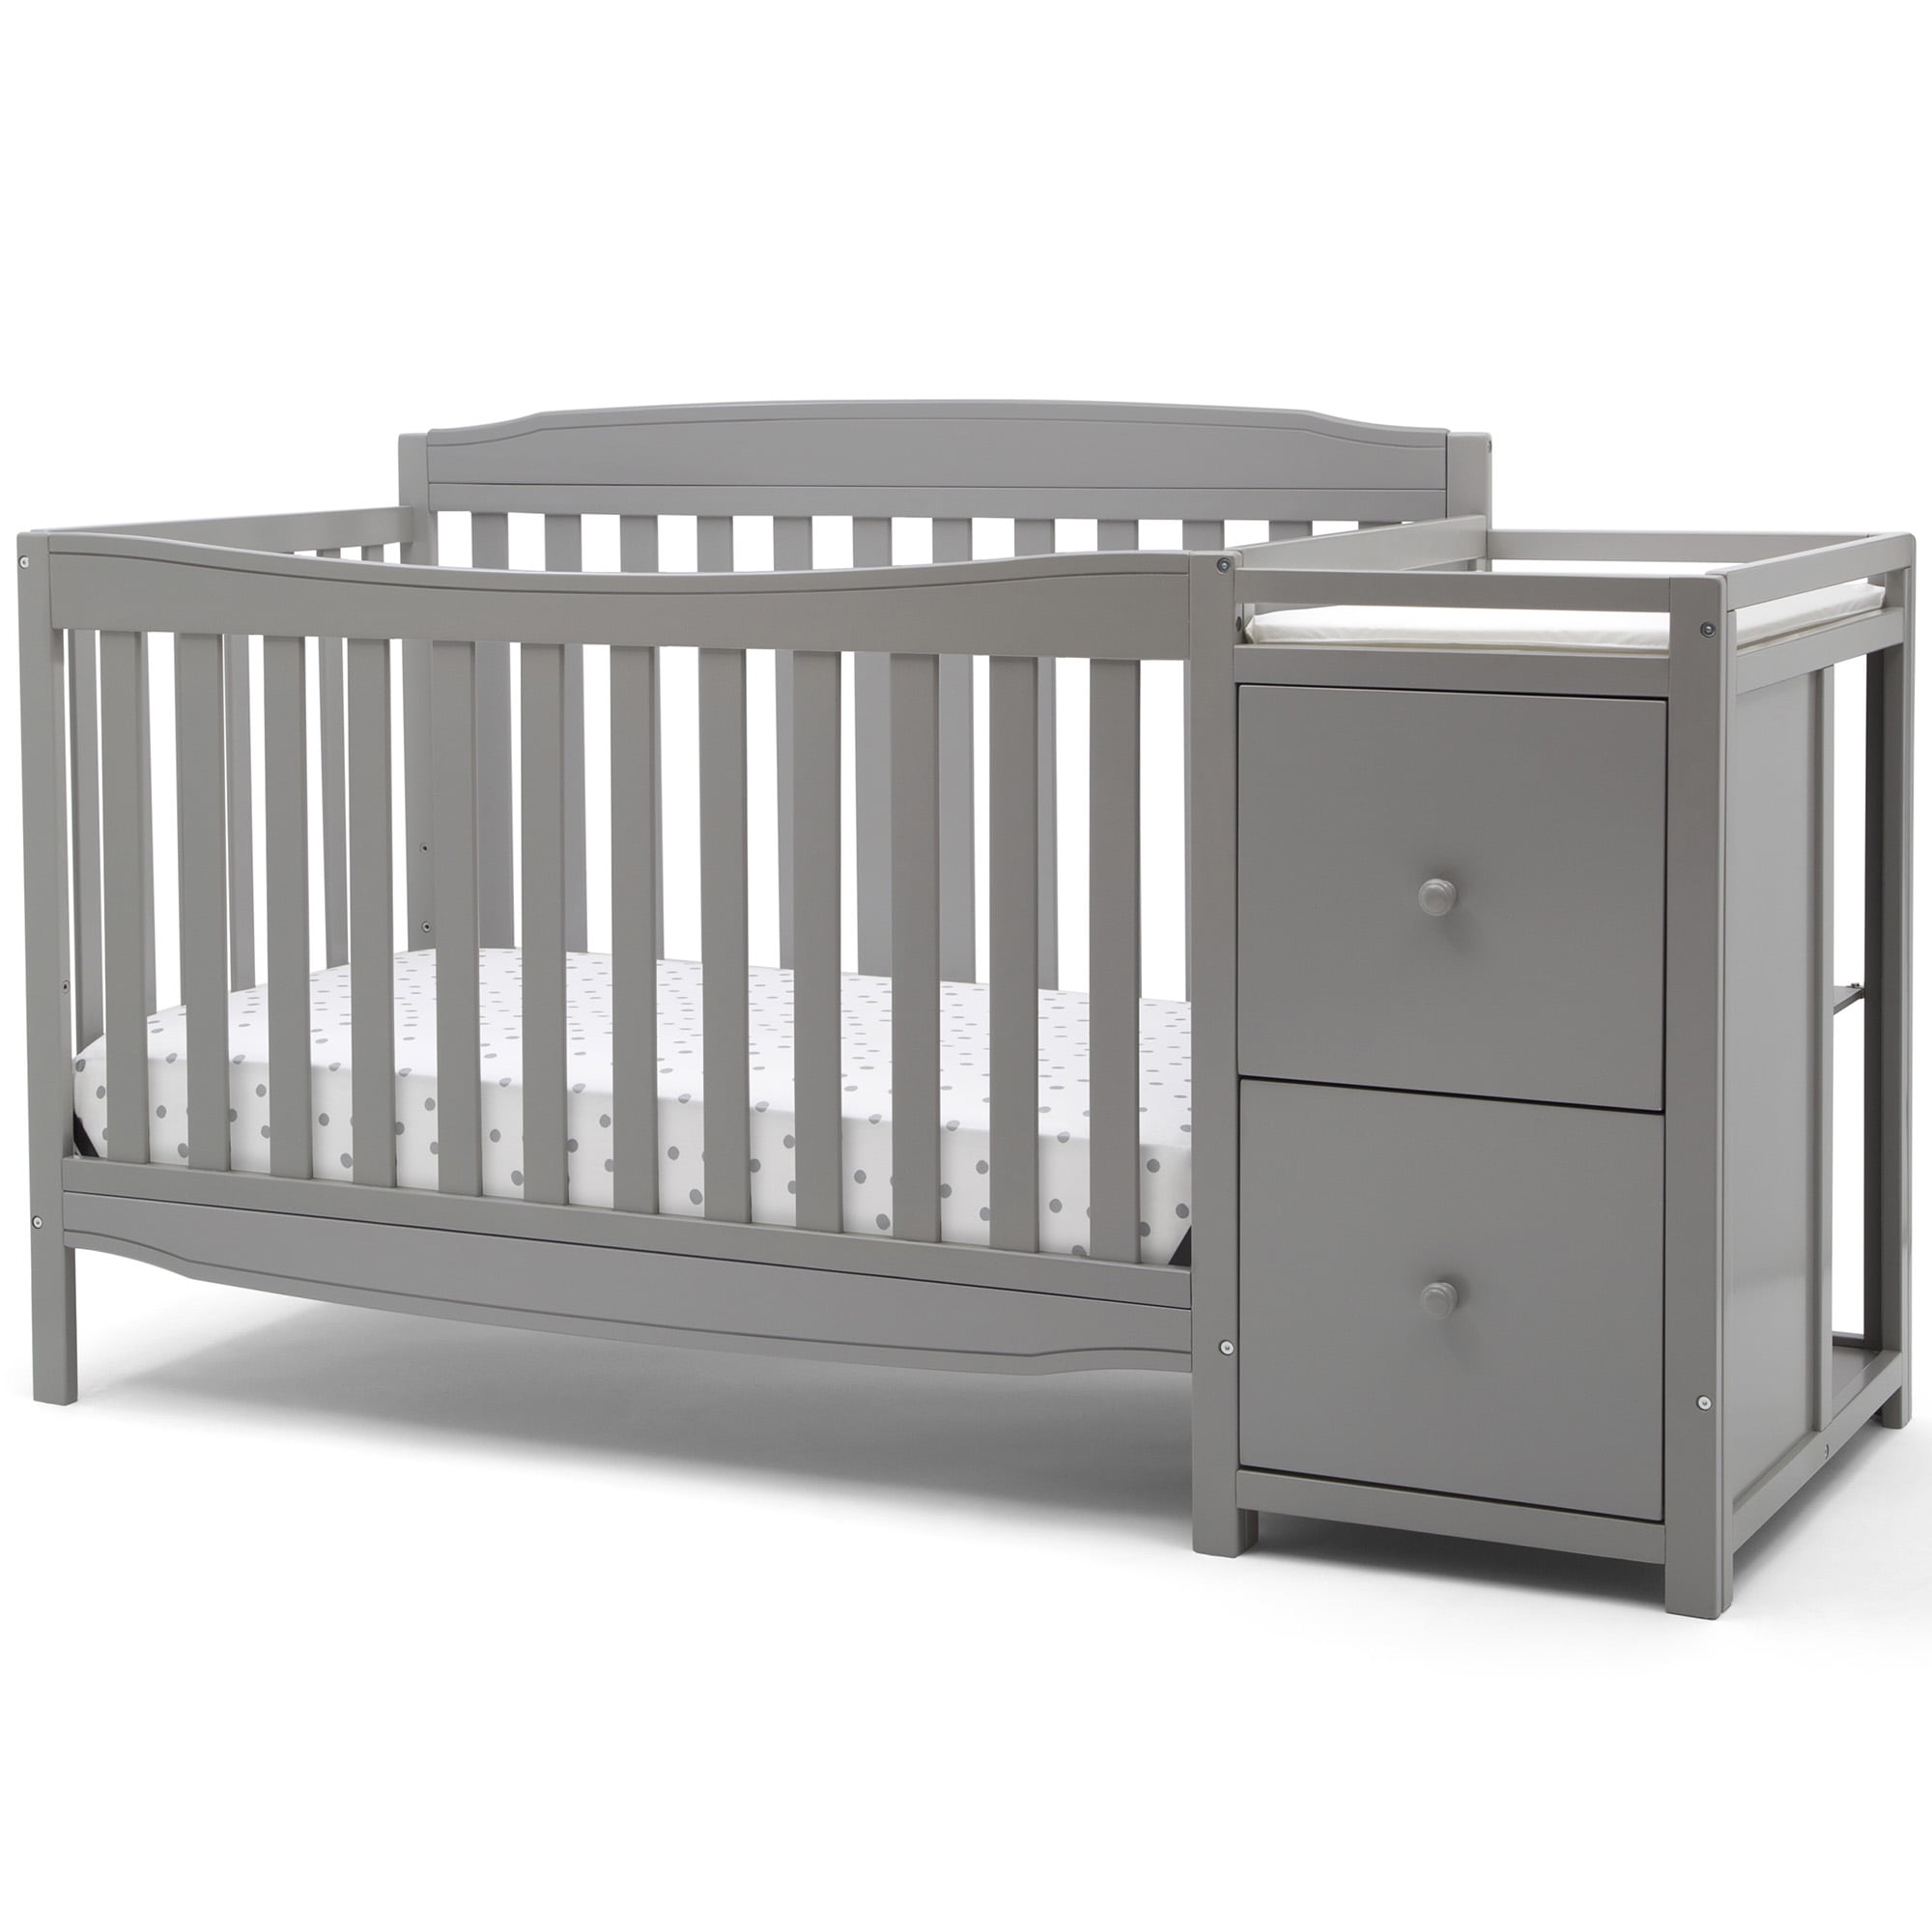 delta crib with changing table